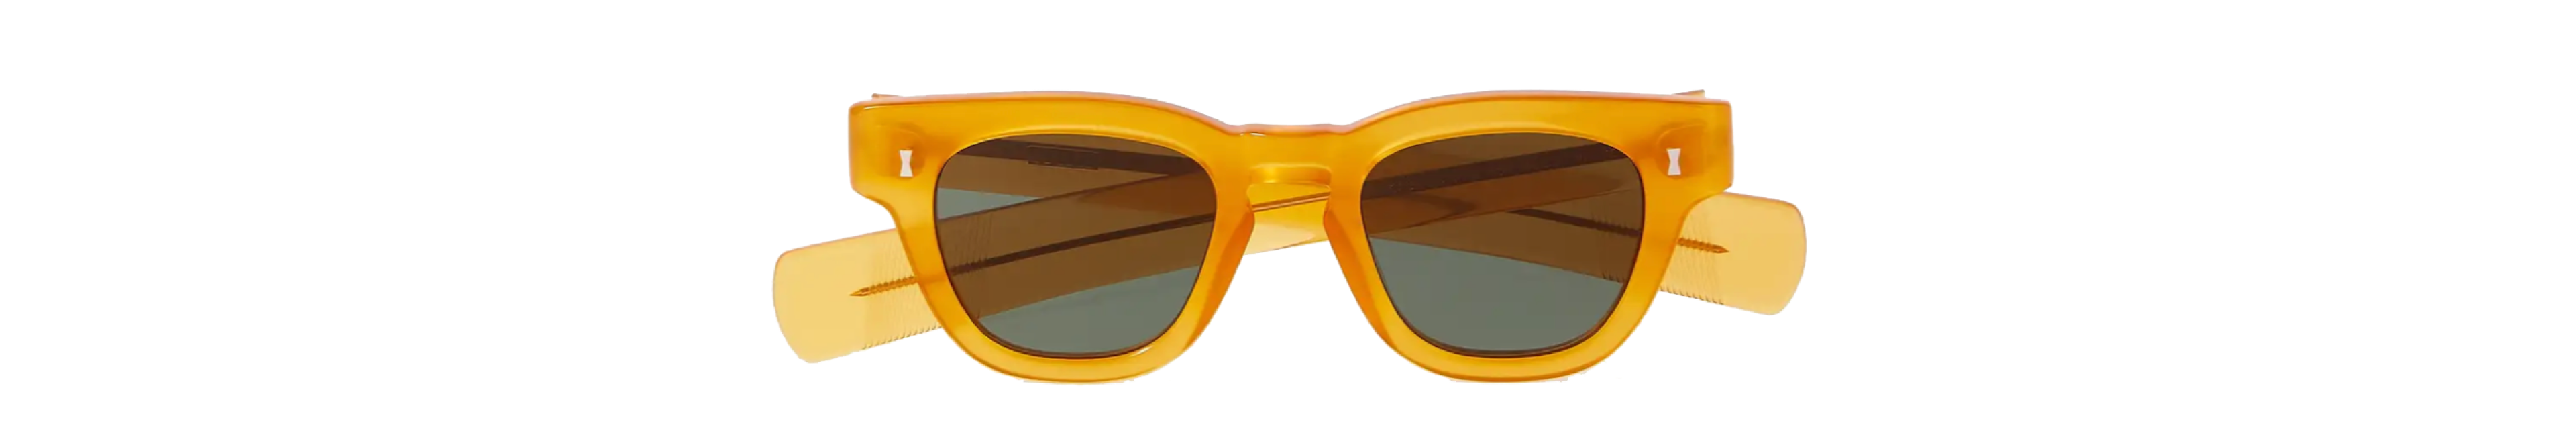 Sunglasses Yellow by Cubbits London